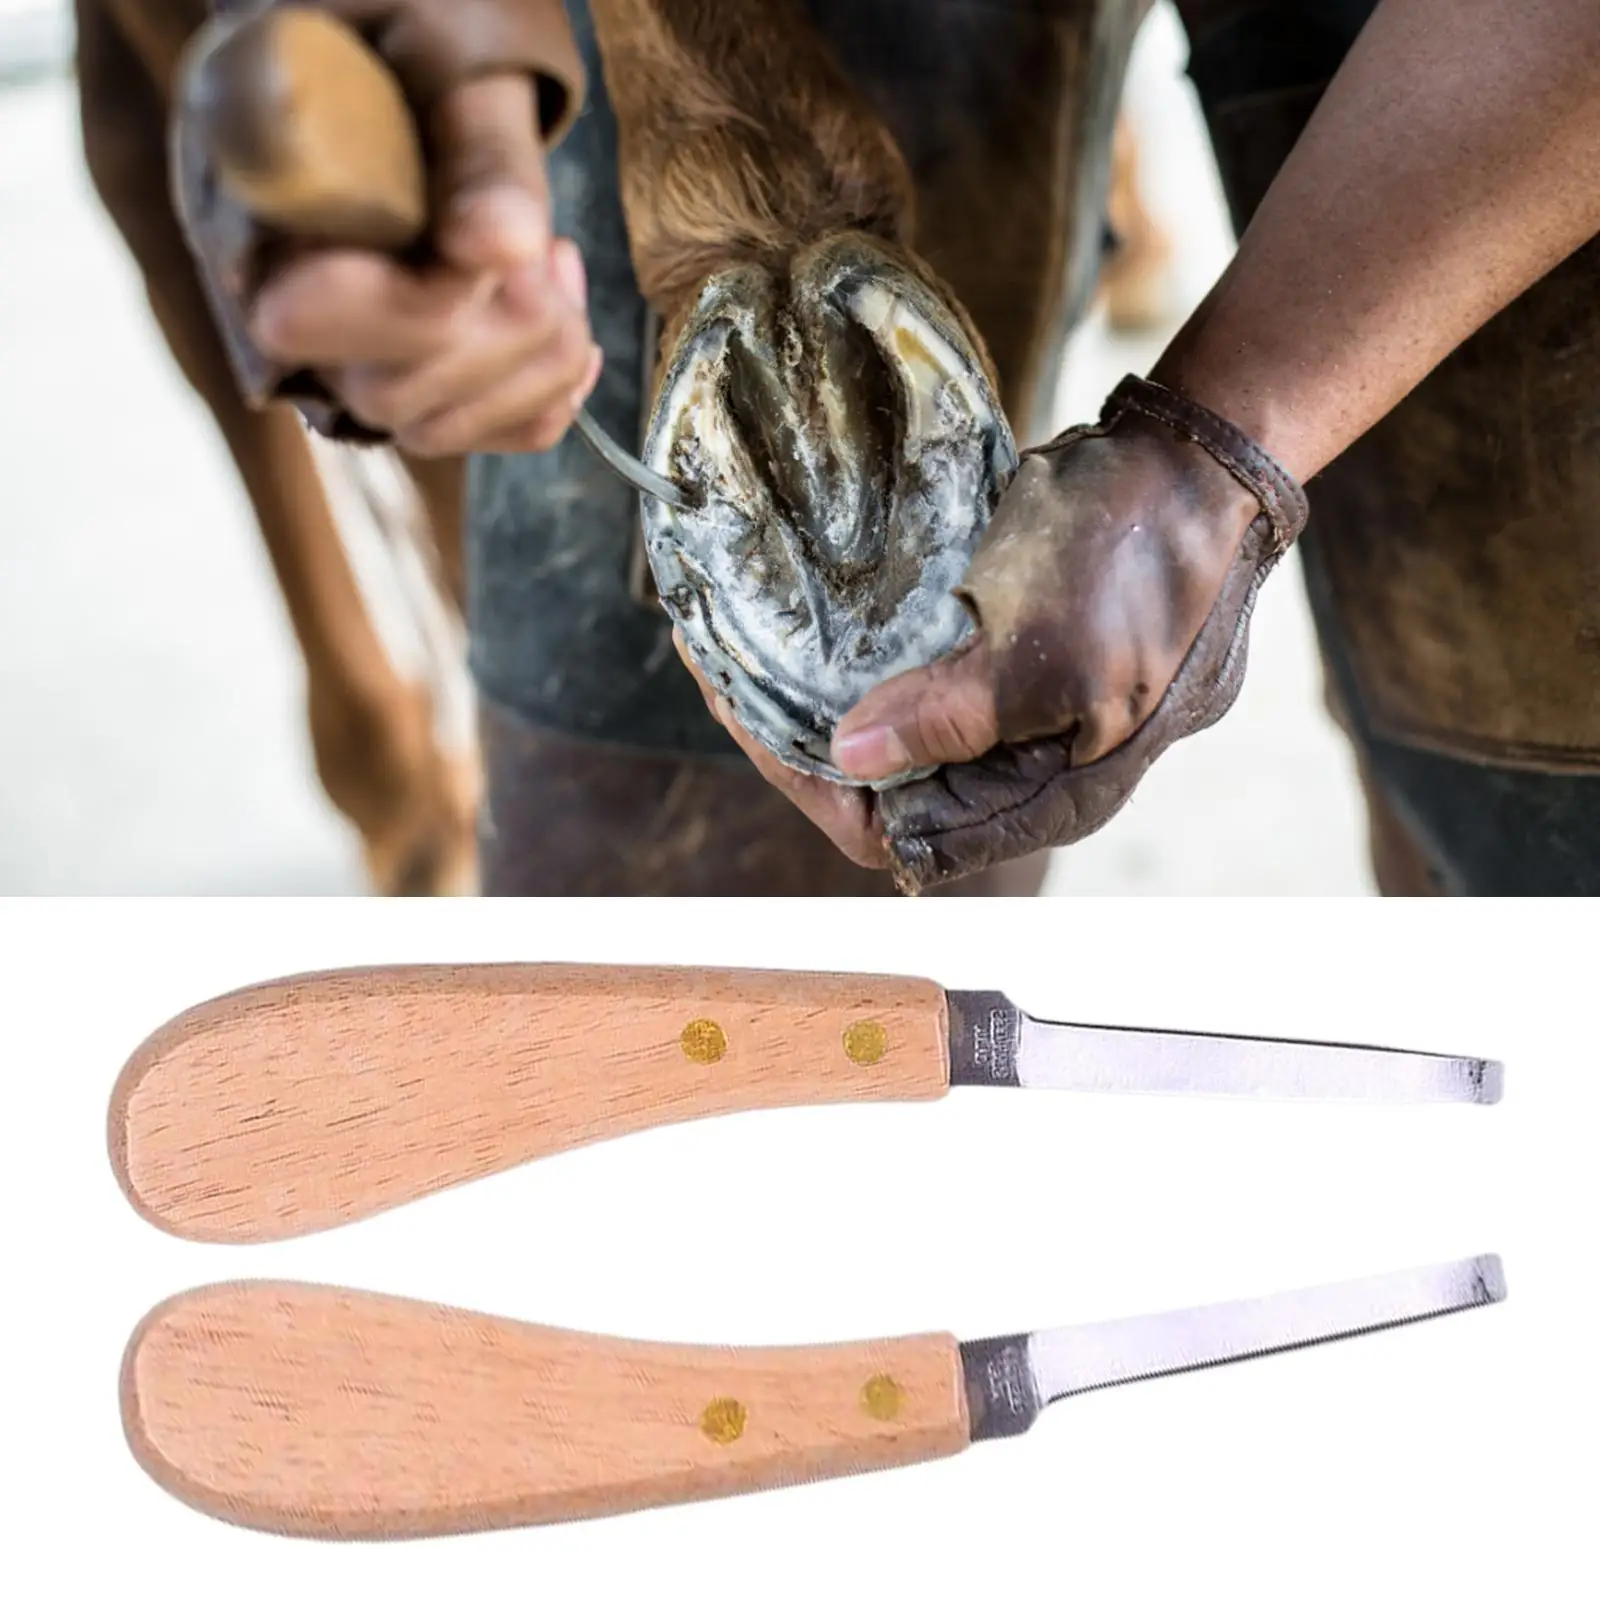 Cattle Hoof Cutter Multipurpose goats Hoof Trimming Shear Nail Clippers Supplies Trimming for Farm Animal Goats Sheep Horse Pig